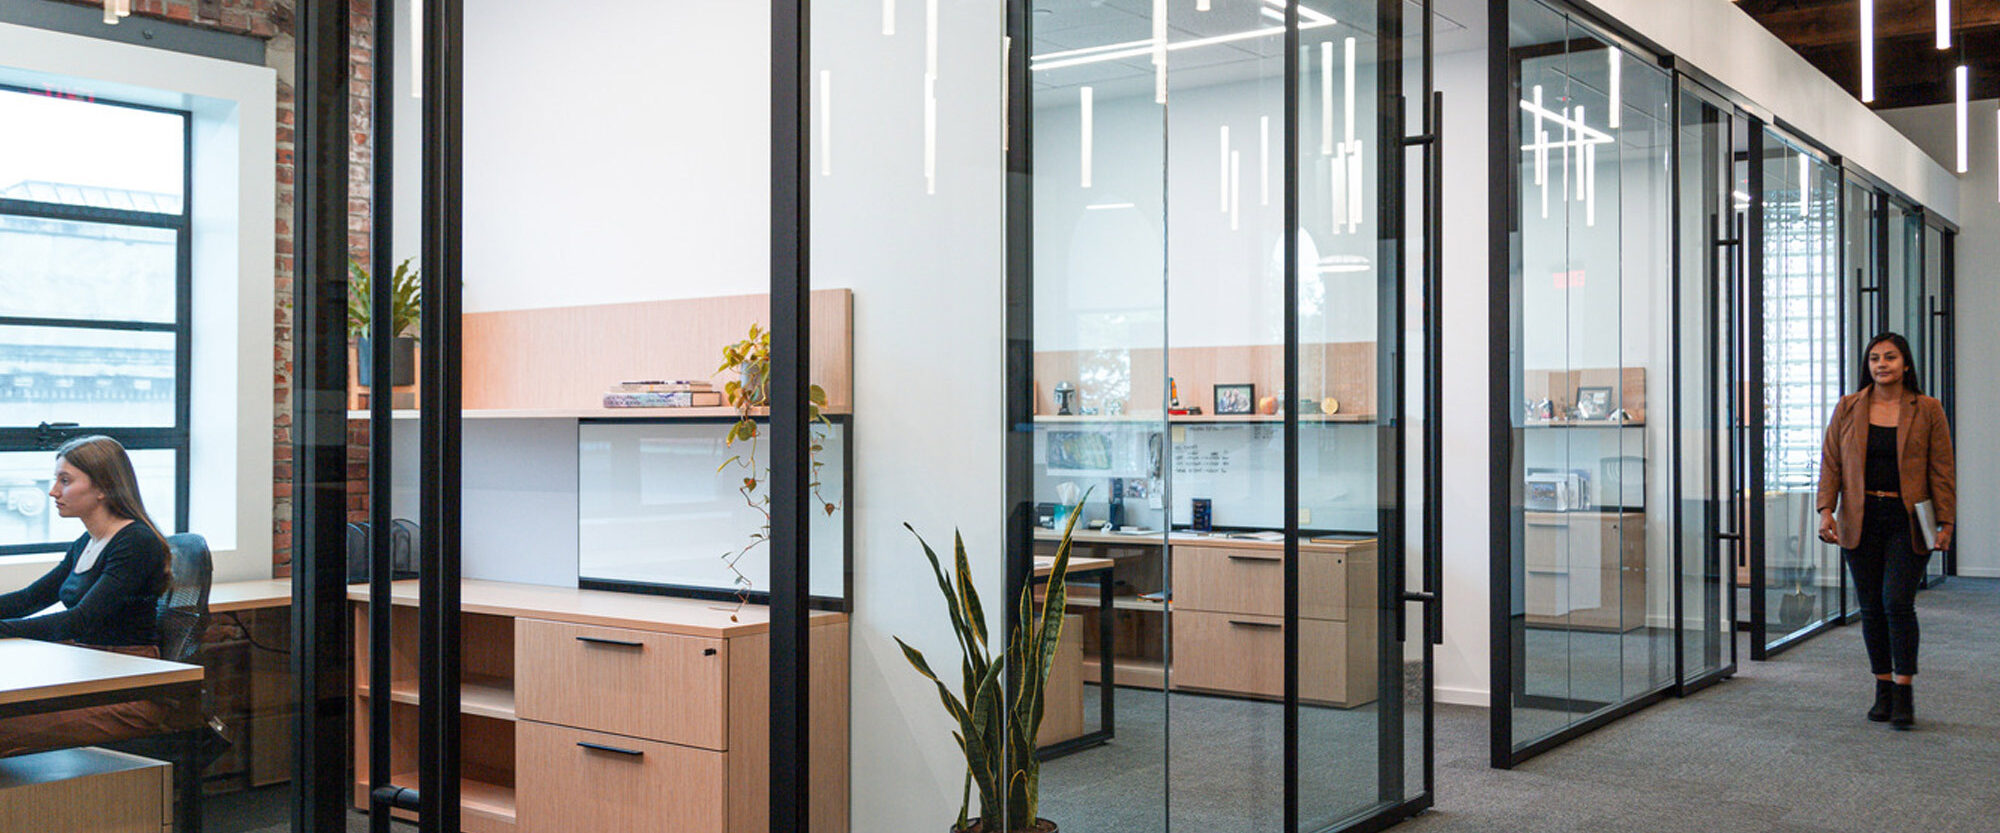 Modern office space highlighting floor-to-ceiling glass partitions, sleek black frames, and wooden desks that create an open yet compartmentalized work environment. Exposed ceiling beams add an industrial touch, while natural light and plants bring warmth to the setting.